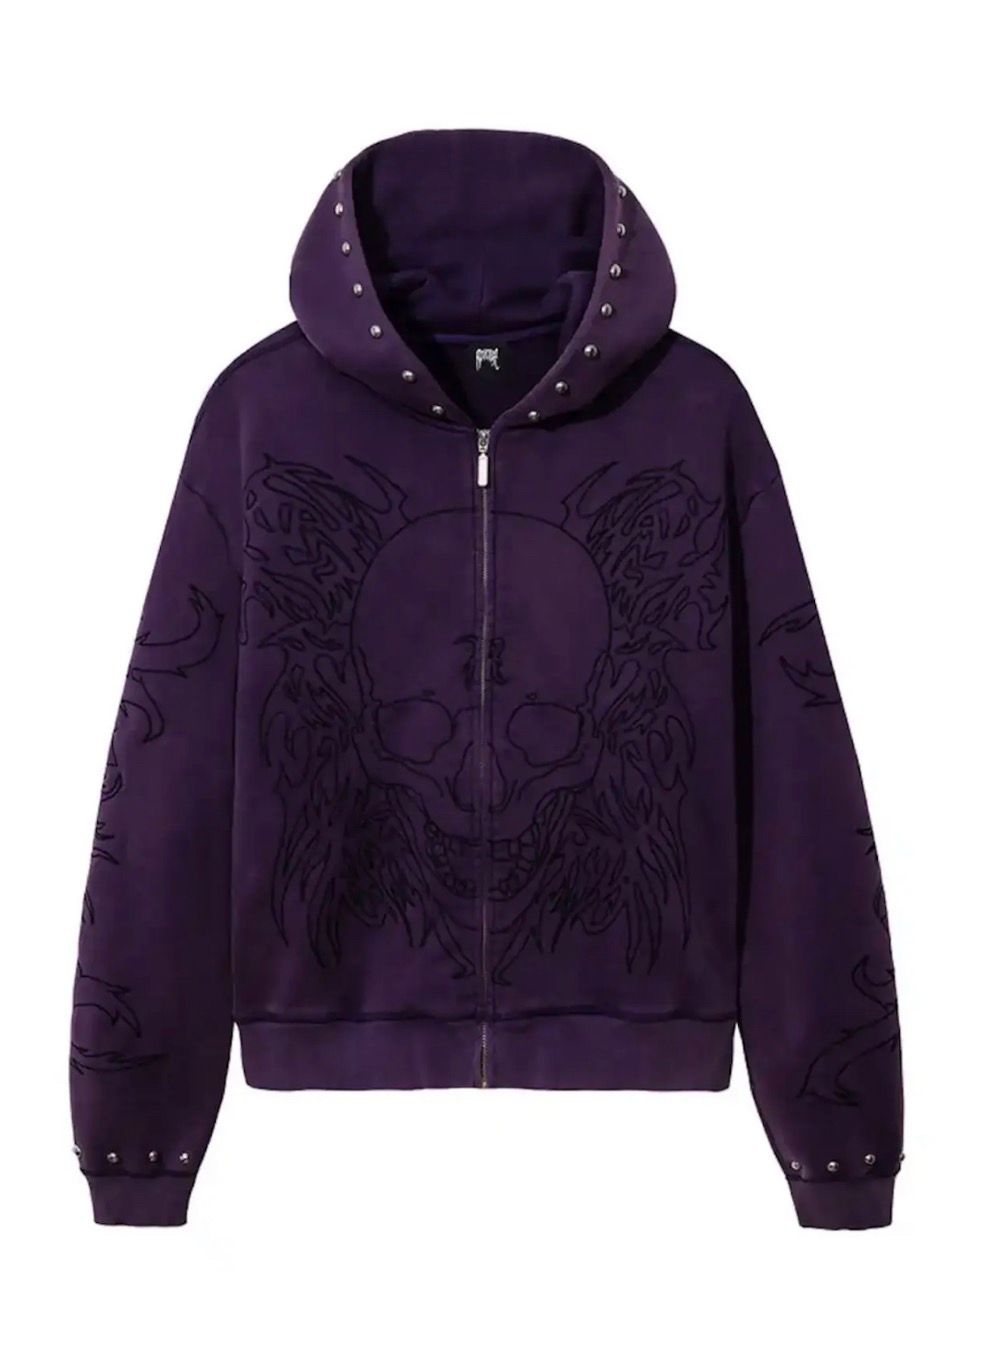 Pre-owned Revenge Embroidered Tribal Zip Up Skull Hoodie Washed Purple